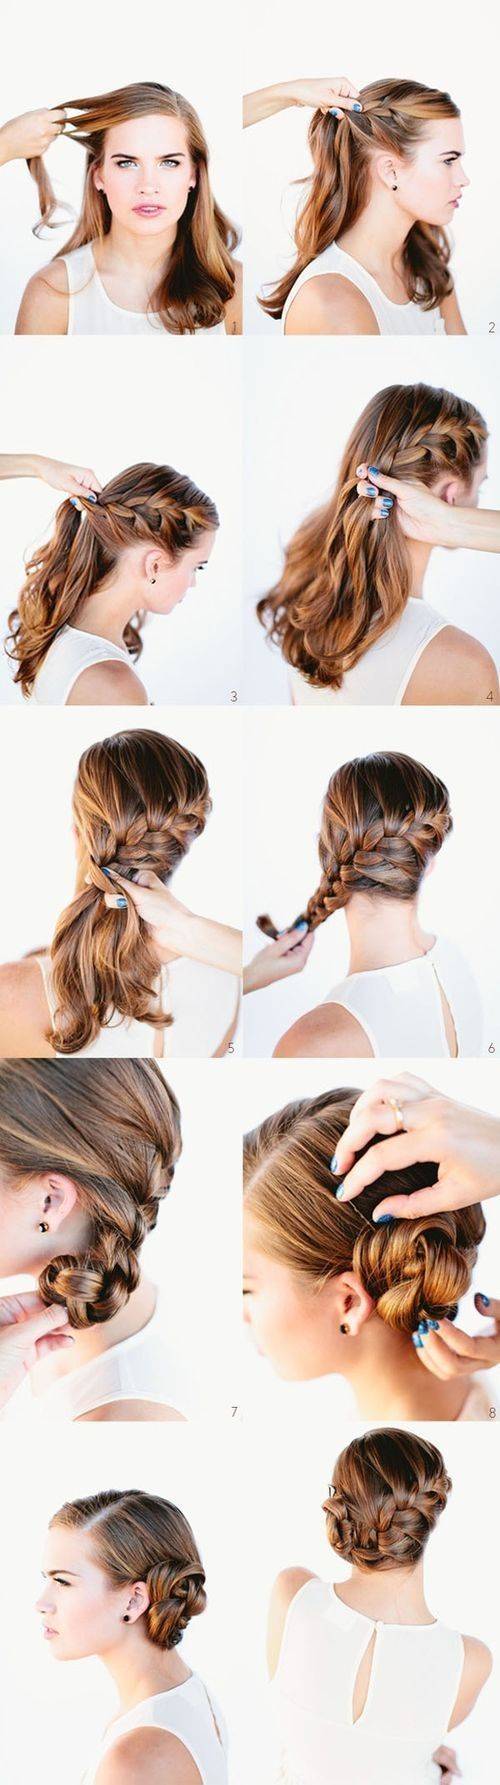 https://image.sistacafe.com/images/uploads/content_image/image/39723/1443080751-15-stylish-mermaid-hairstyles-to-pair-your-looks12.jpg